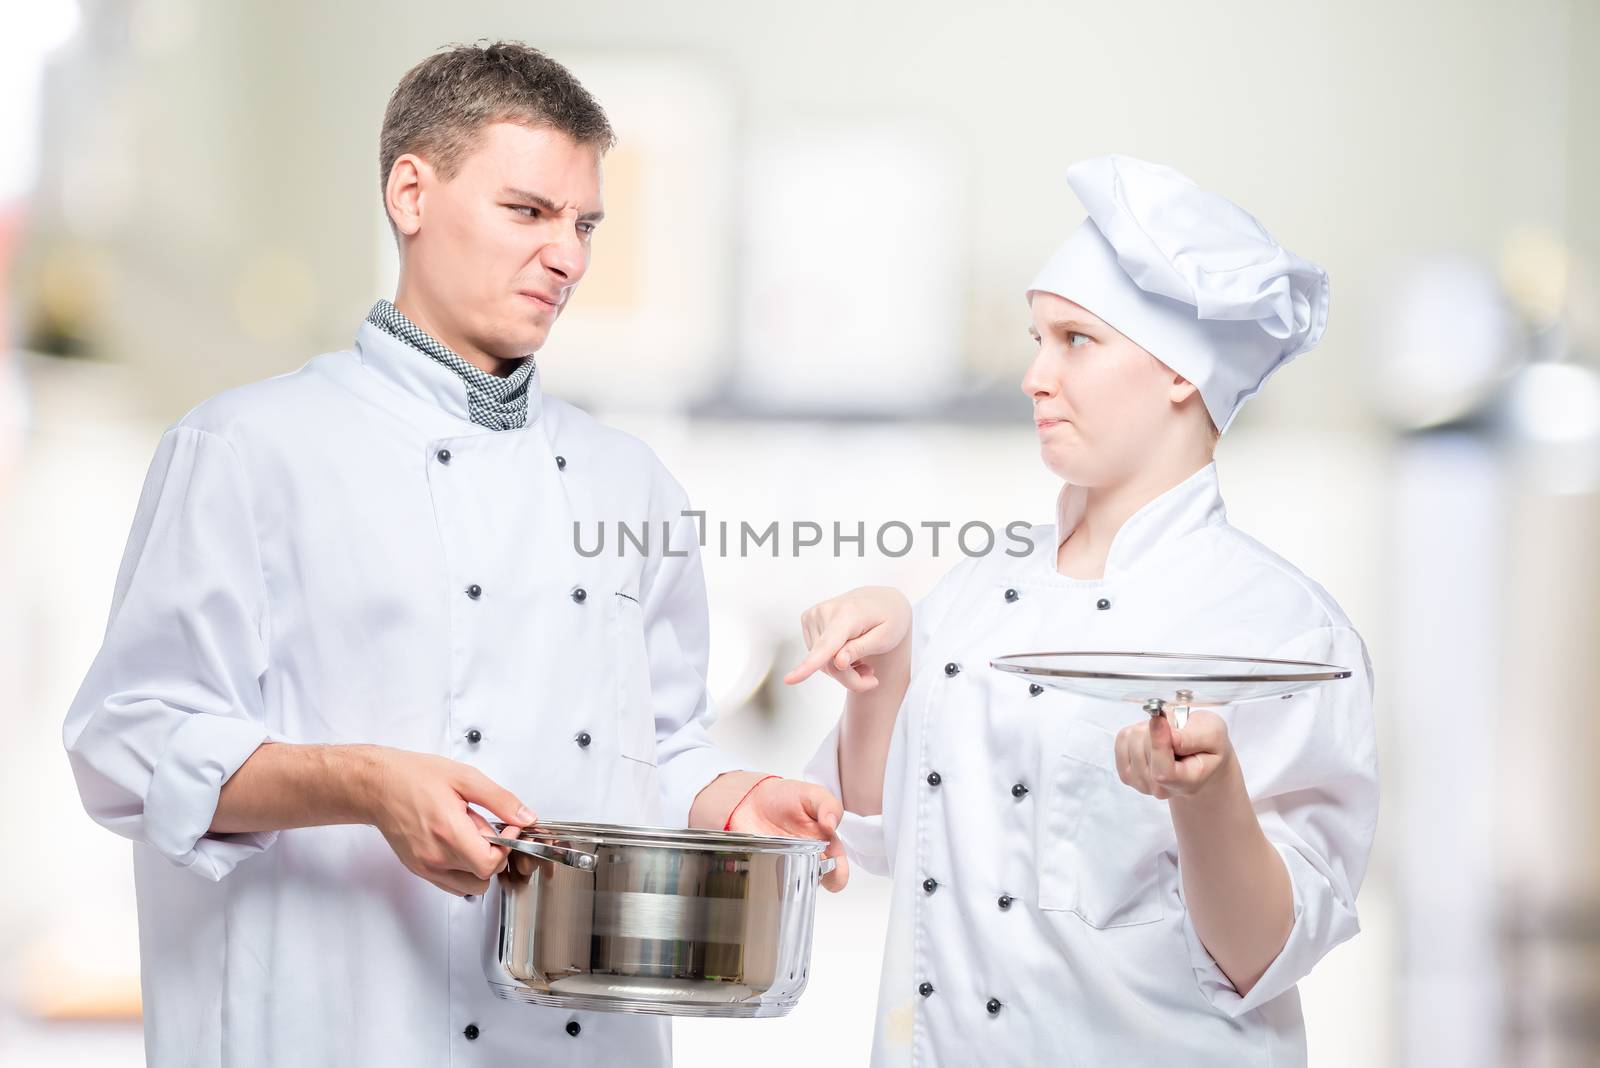 chef looks at a cooked dish of a young cook with reproach in the by kosmsos111